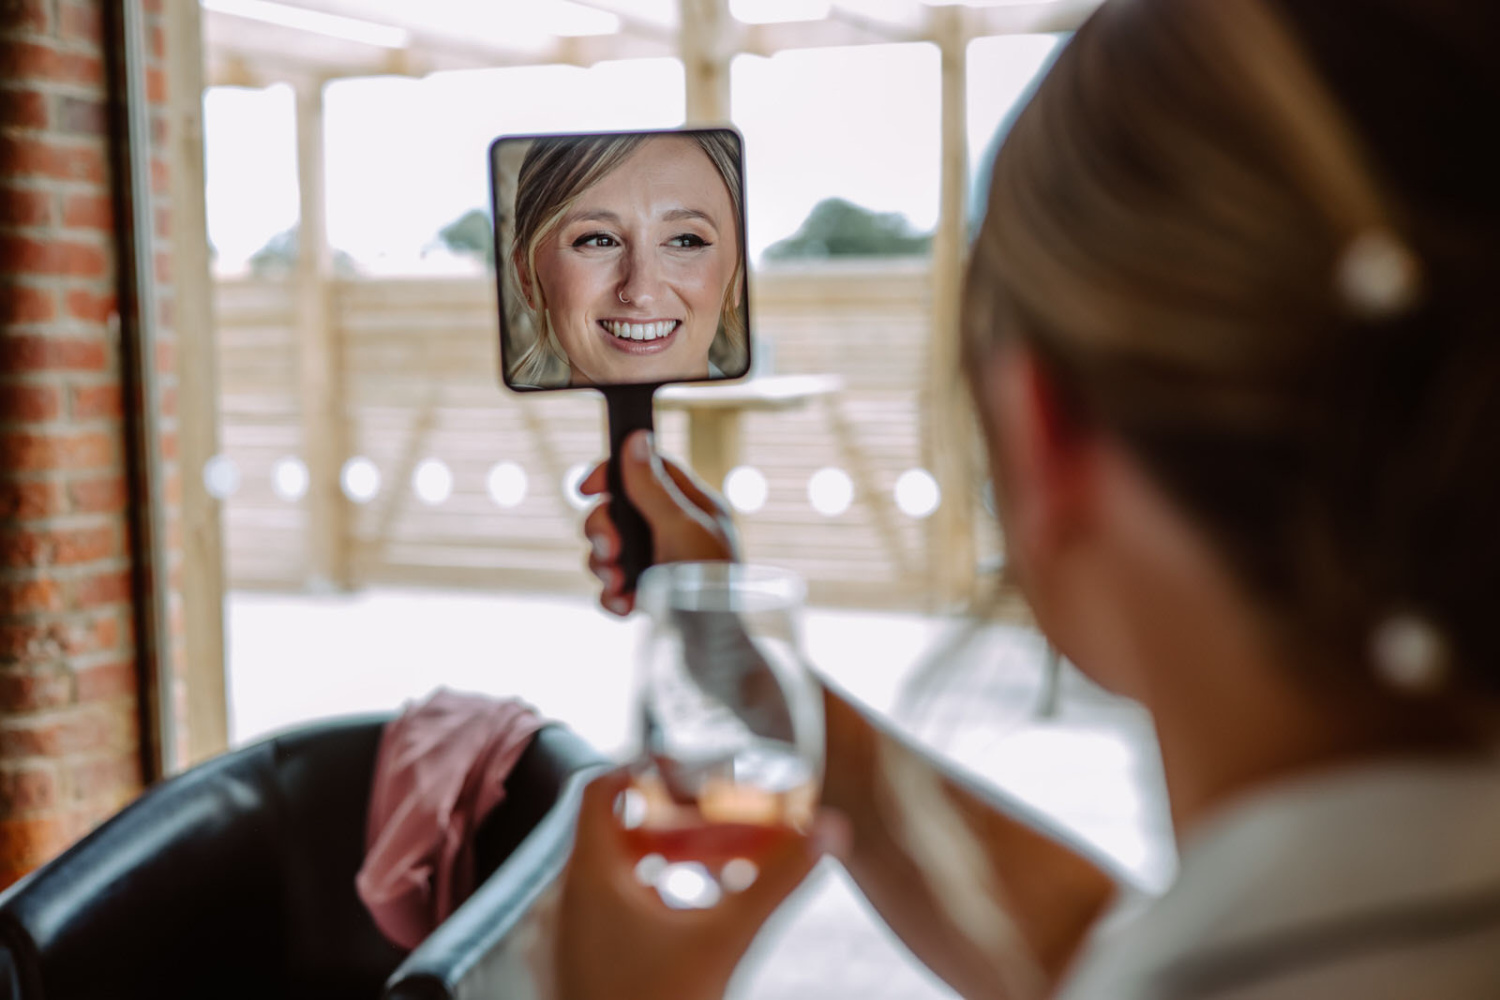 A bride holding a glass of wine in front of a mirror.